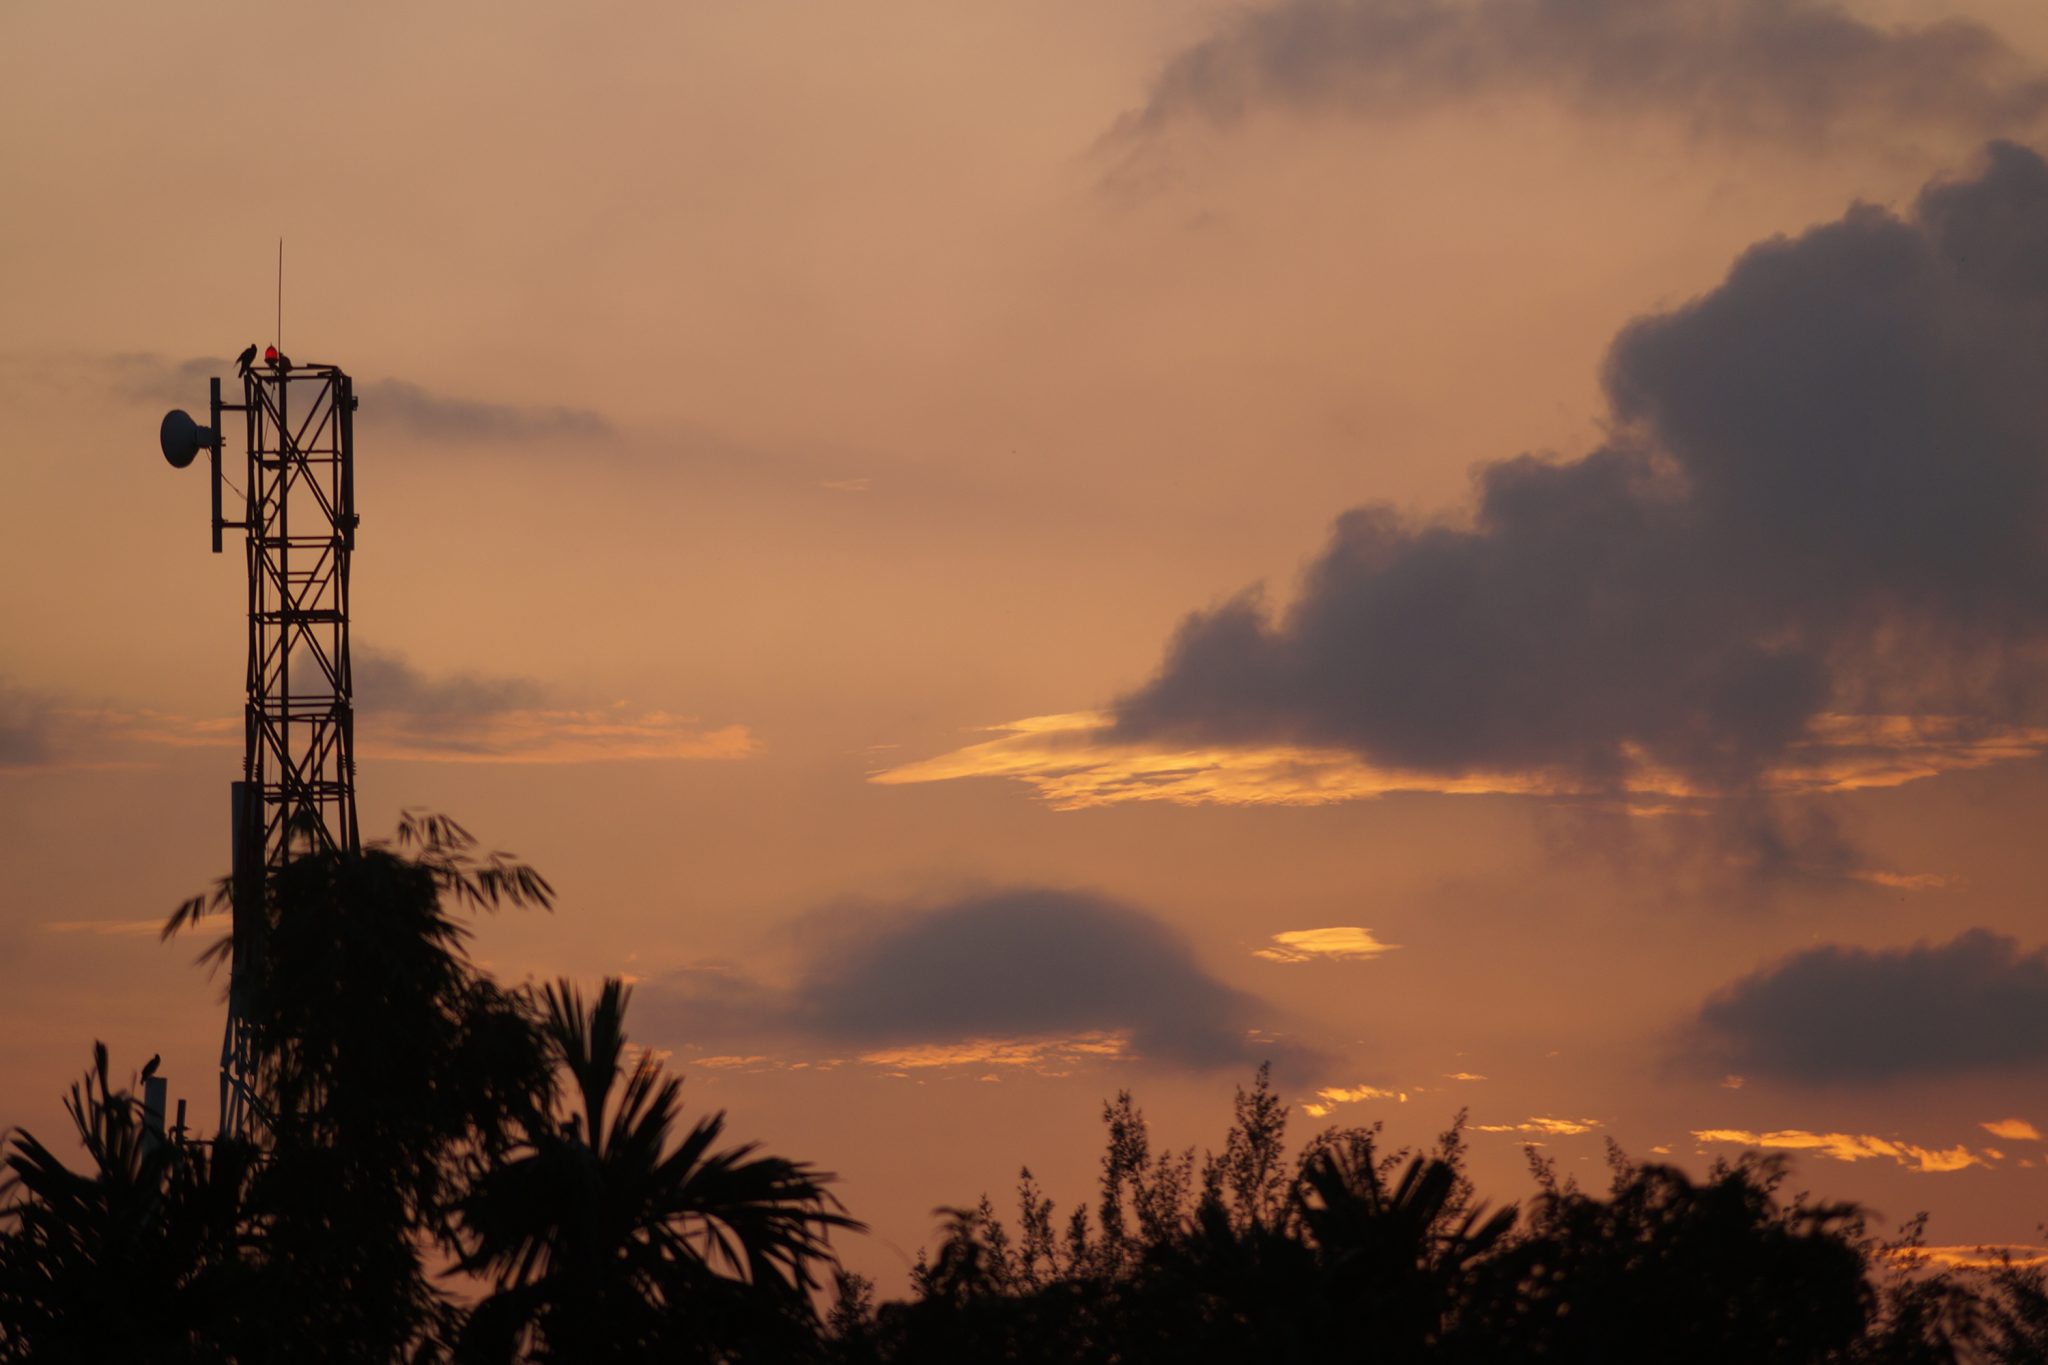 Twilight sky gracefully paints a majestic tower while a solitary bird perches atop.